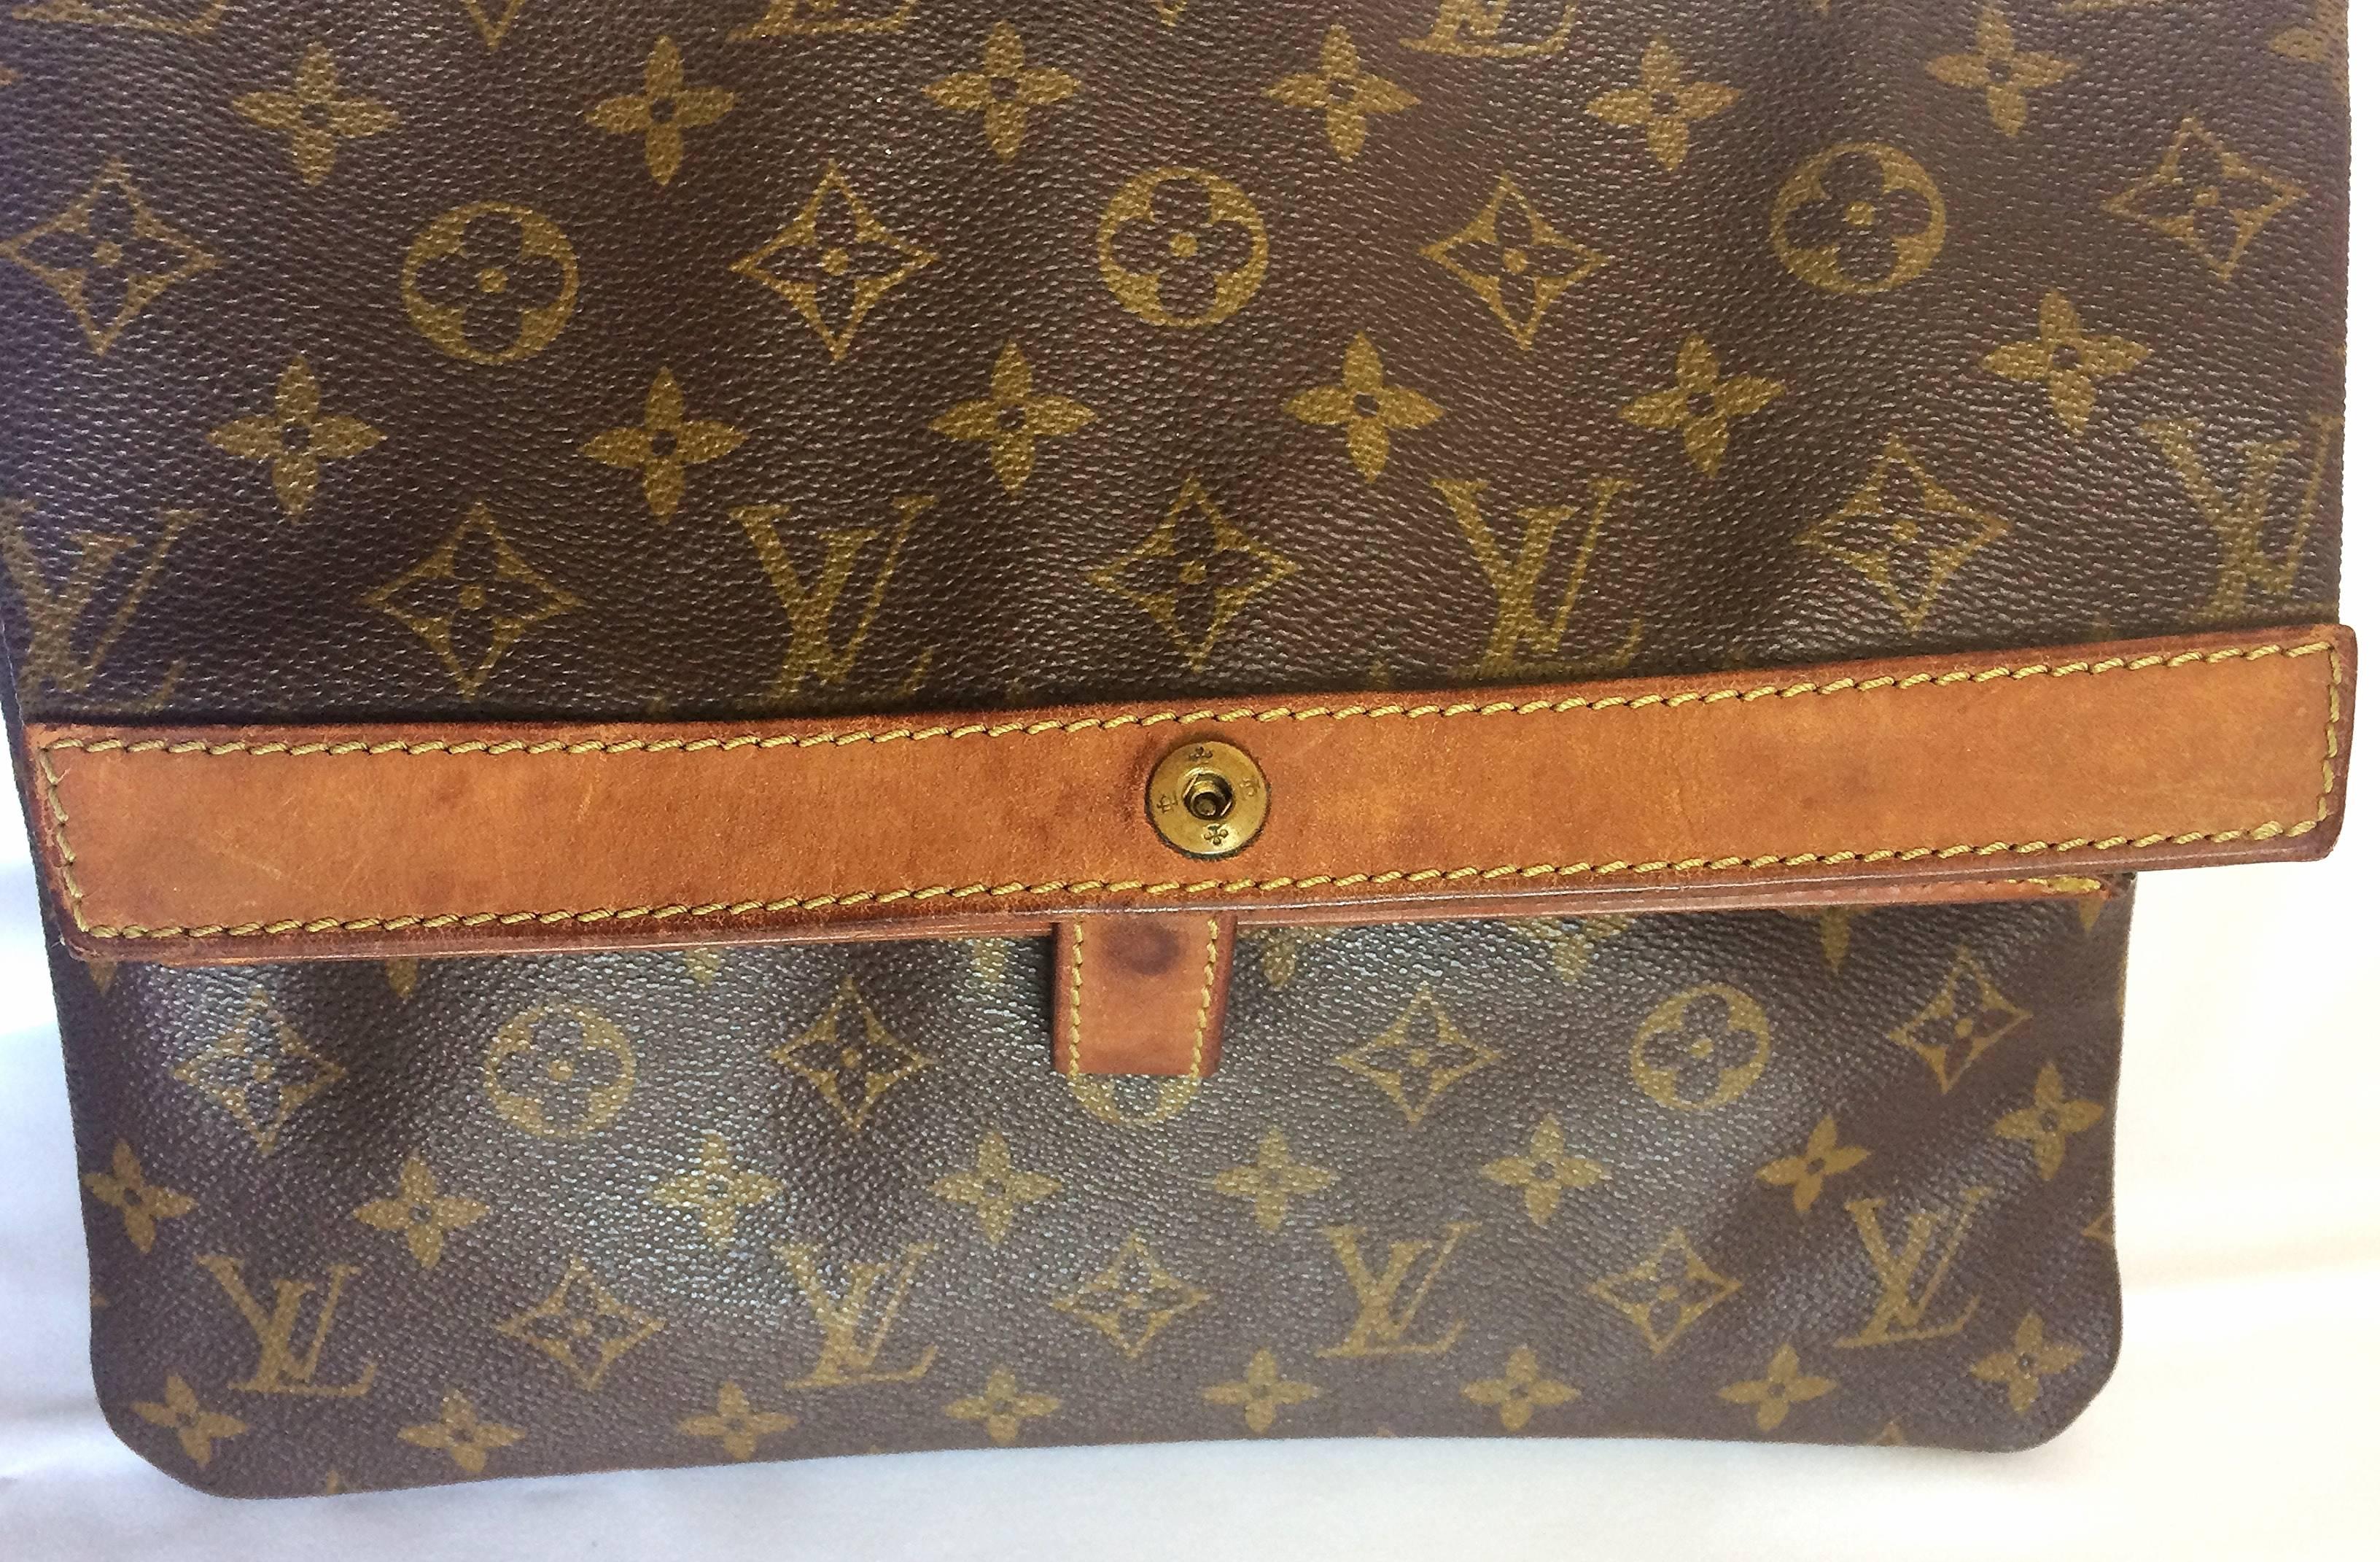 1970's, 80's vintage Louis Vuitton monogram envelope style document portfolio purse. Unisex use for all generations. Eclair zipper.

Take it anywhere and anytime with you for all occasion!
This is one of the rarest pieces of Louis Vuitton